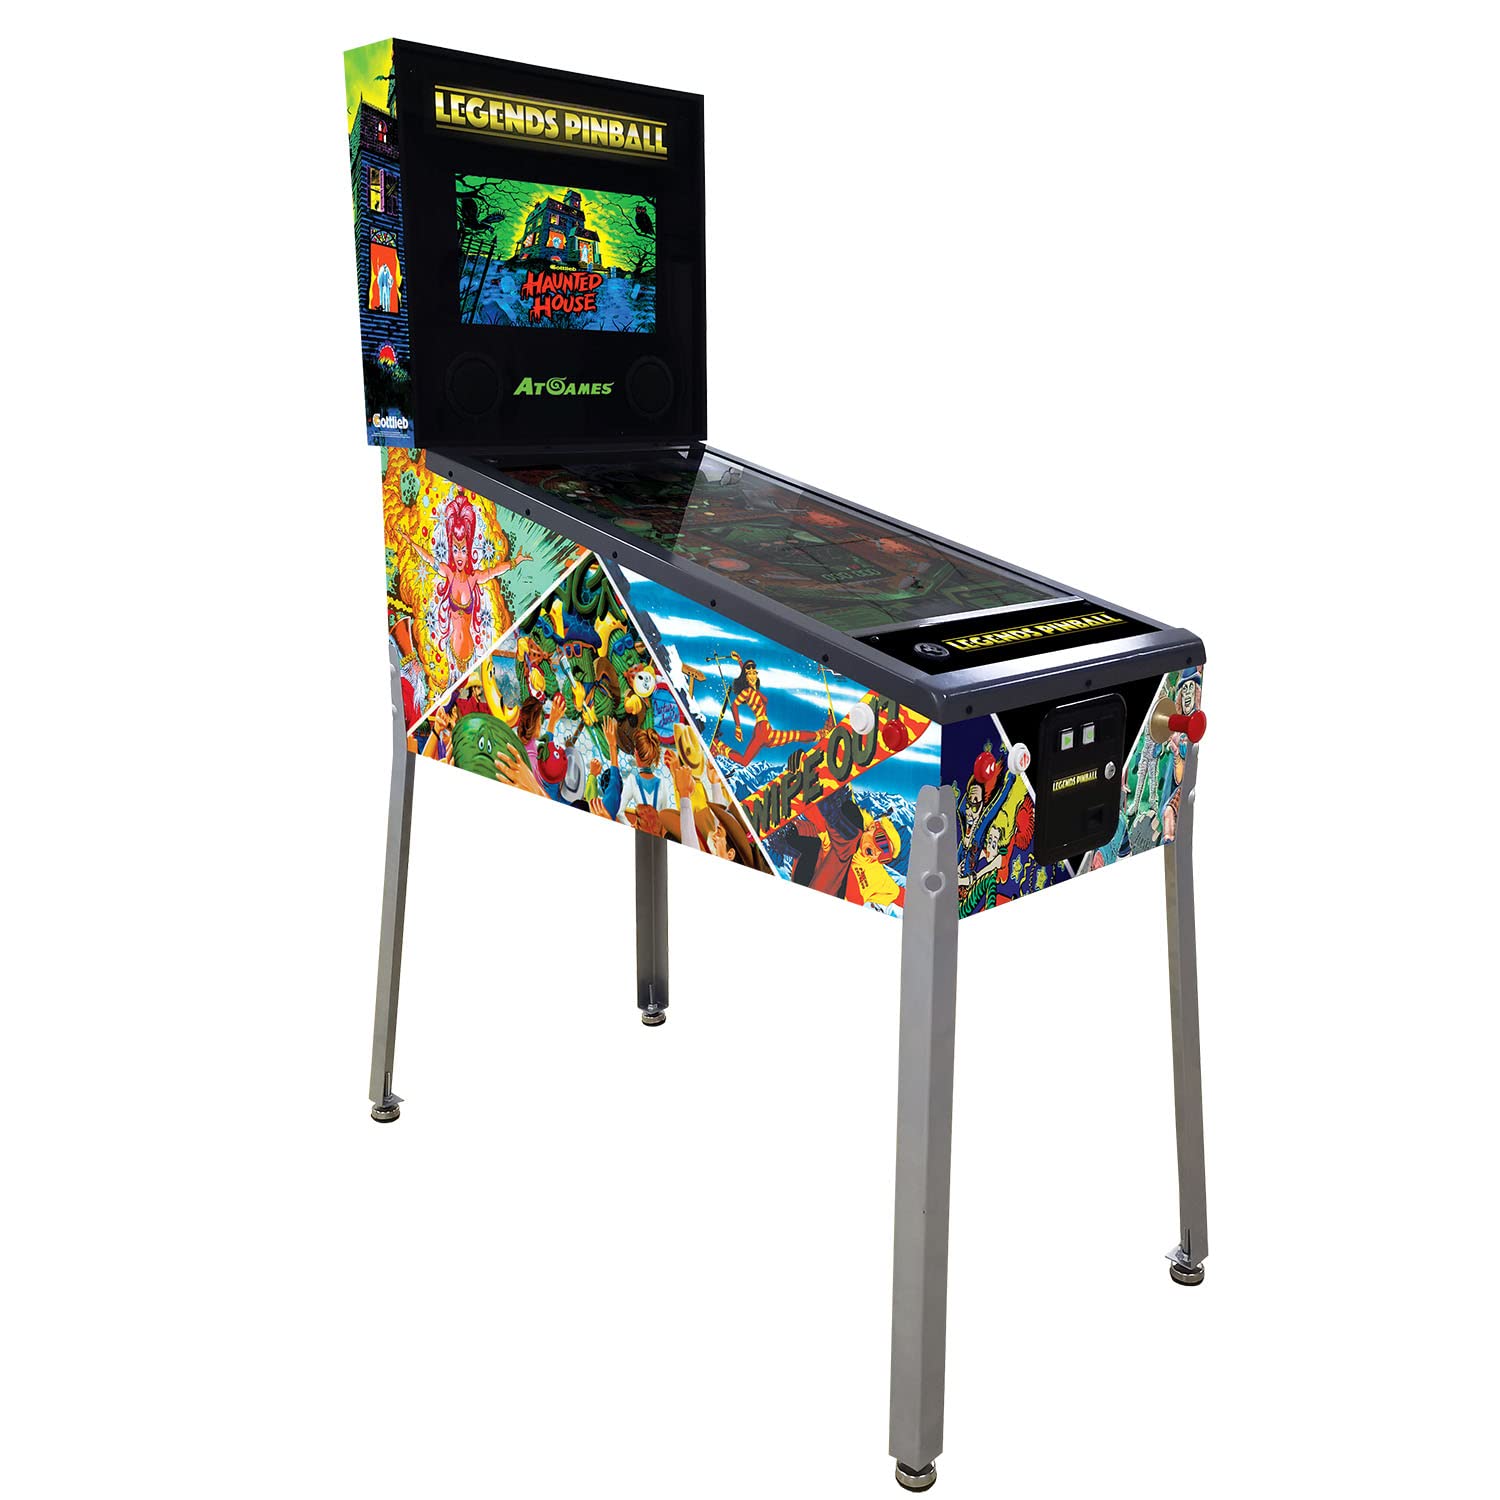 Legends Pinball, Full Size Arcade Machine, Home Arcade, Classic Retro Video Games, 22 Built in Licensed Genre-Defining Pinball Games, Black Hole, Haunted House, Rescue 911, WiFi, HDMI, Bluetooth.